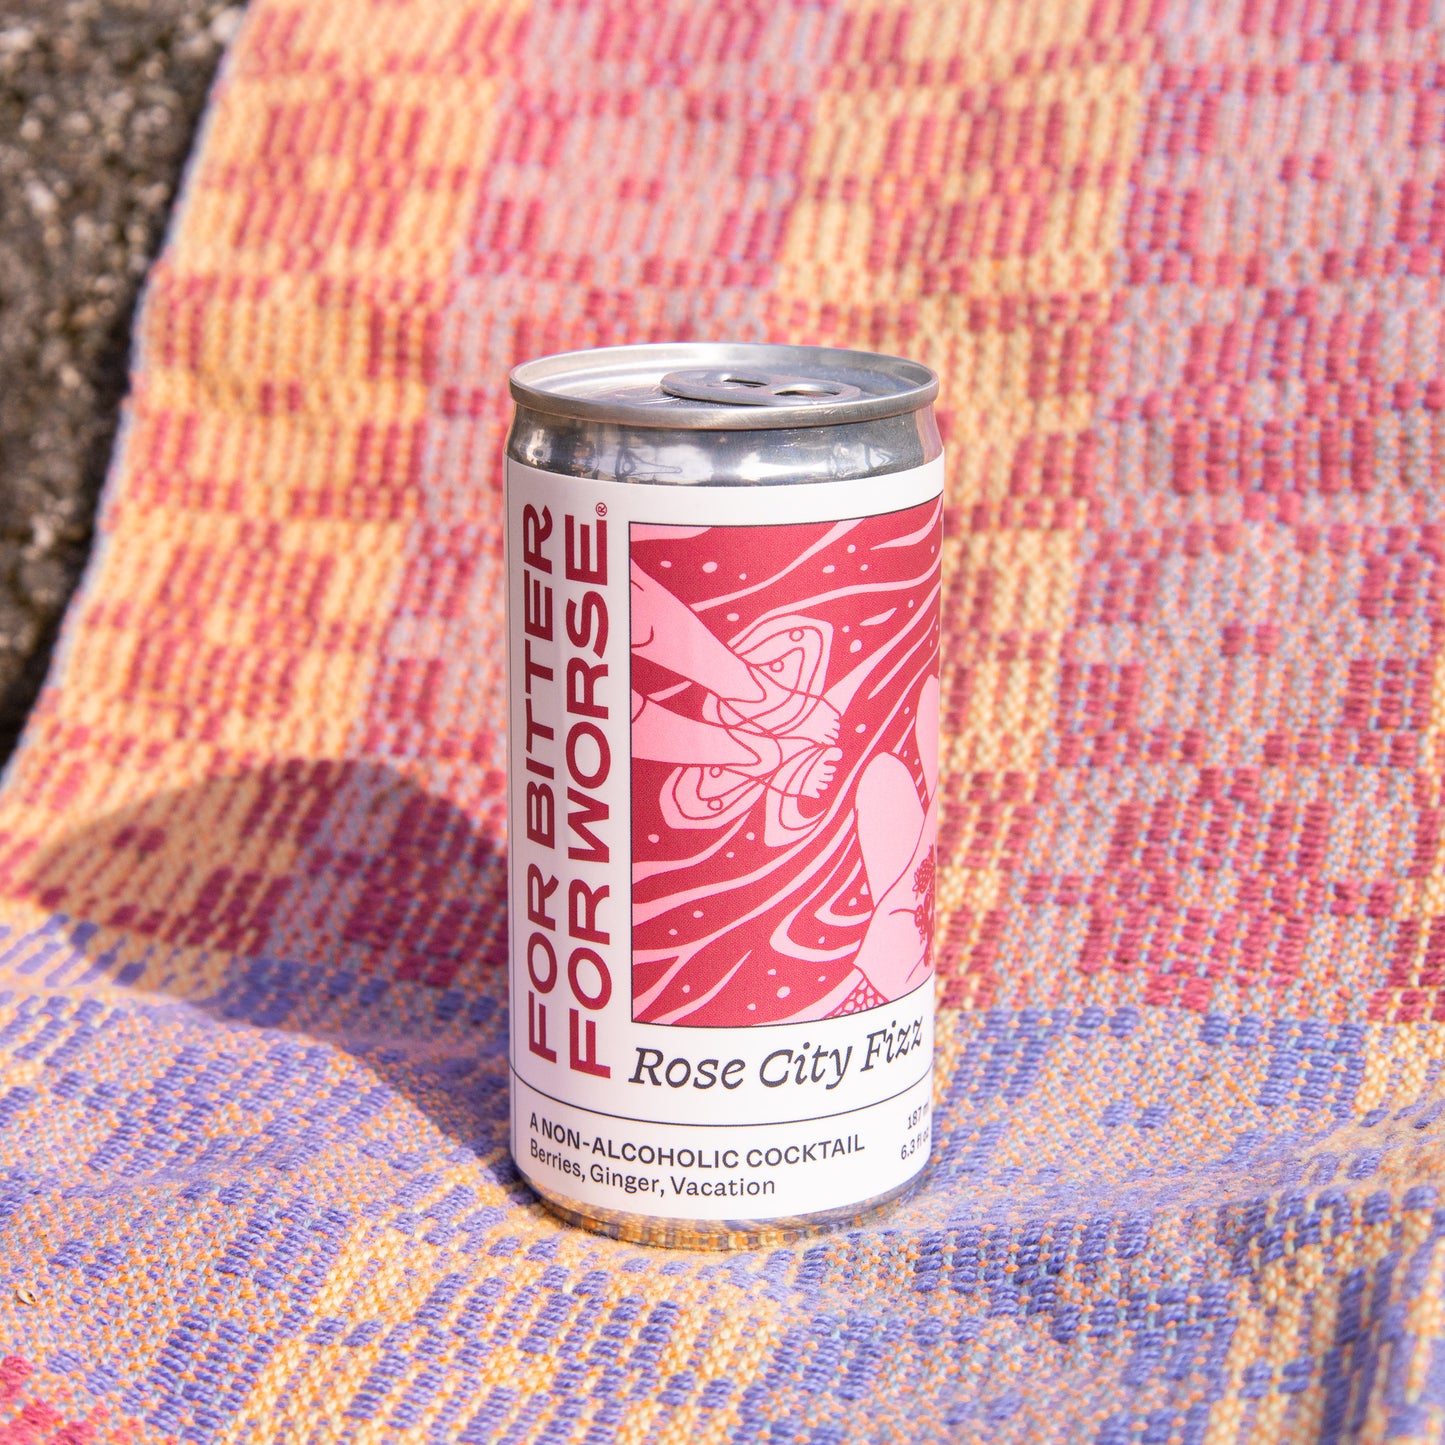 For Bitter For Worse 'Rose City Fizz' Non-alcoholic aperitif